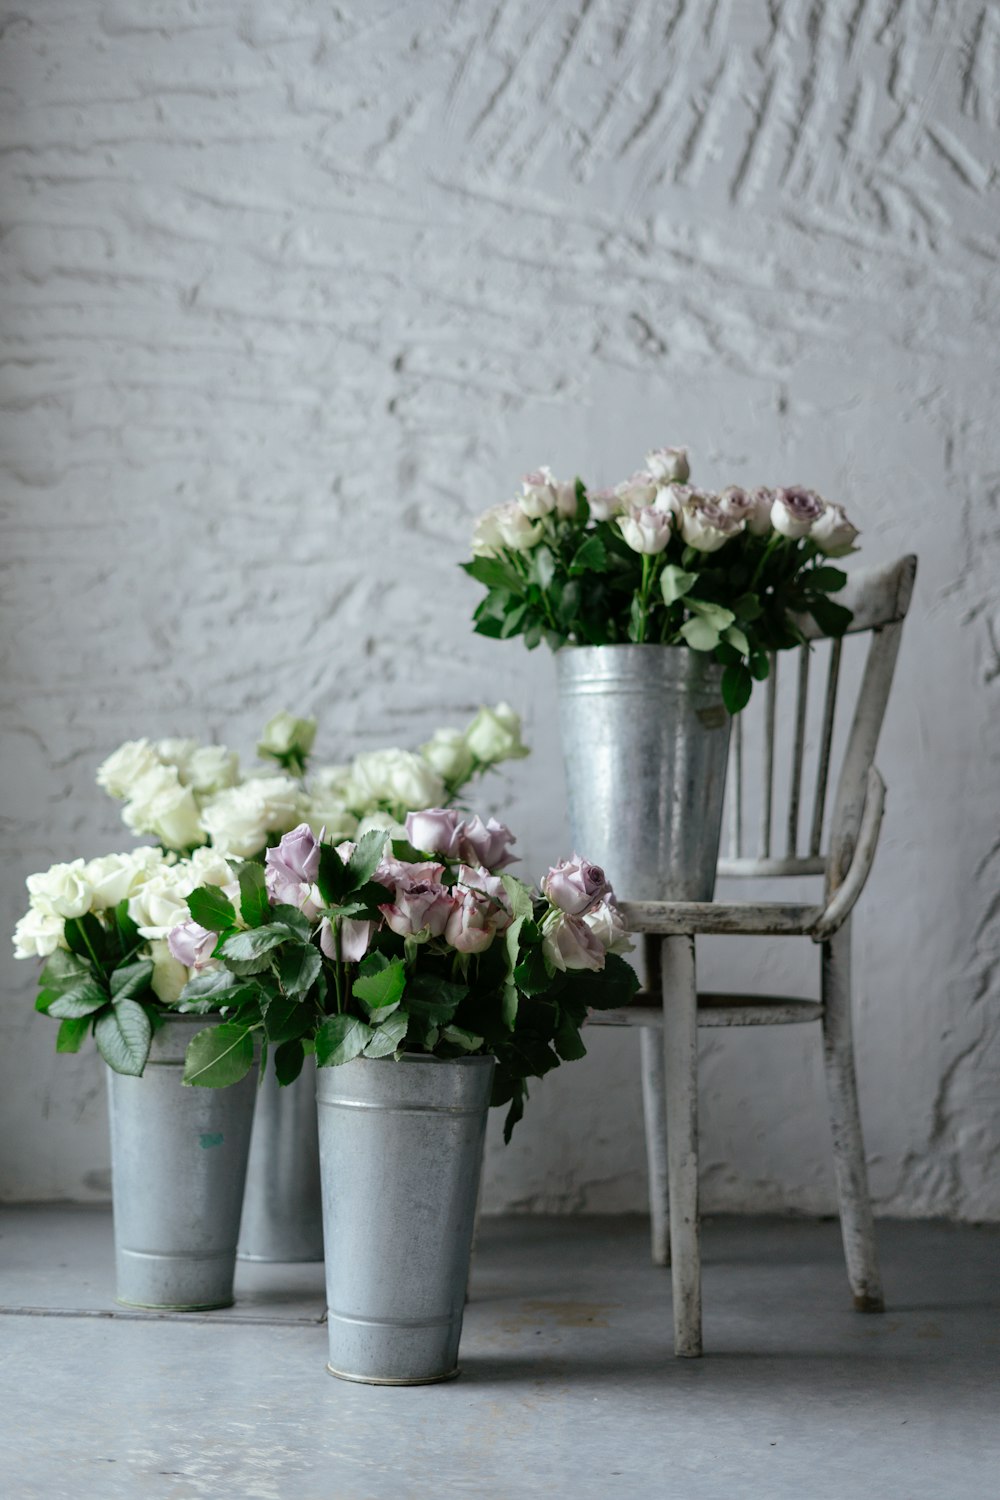 three metal buckets filled with white and pink flowers